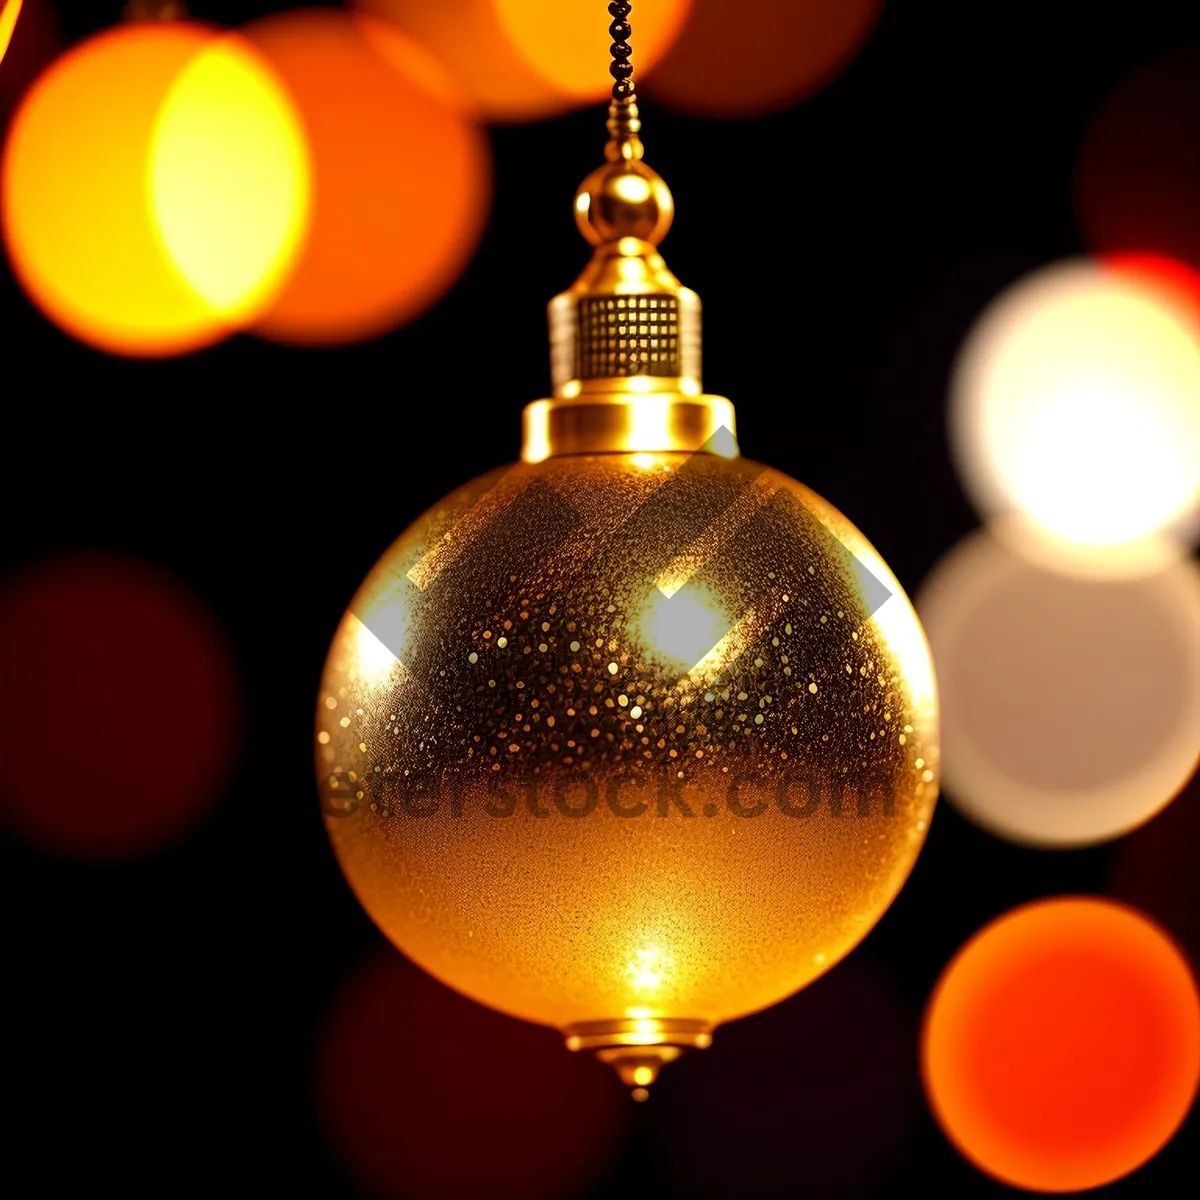 Picture of Golden Winter Celebration Bauble Hanging on Tree